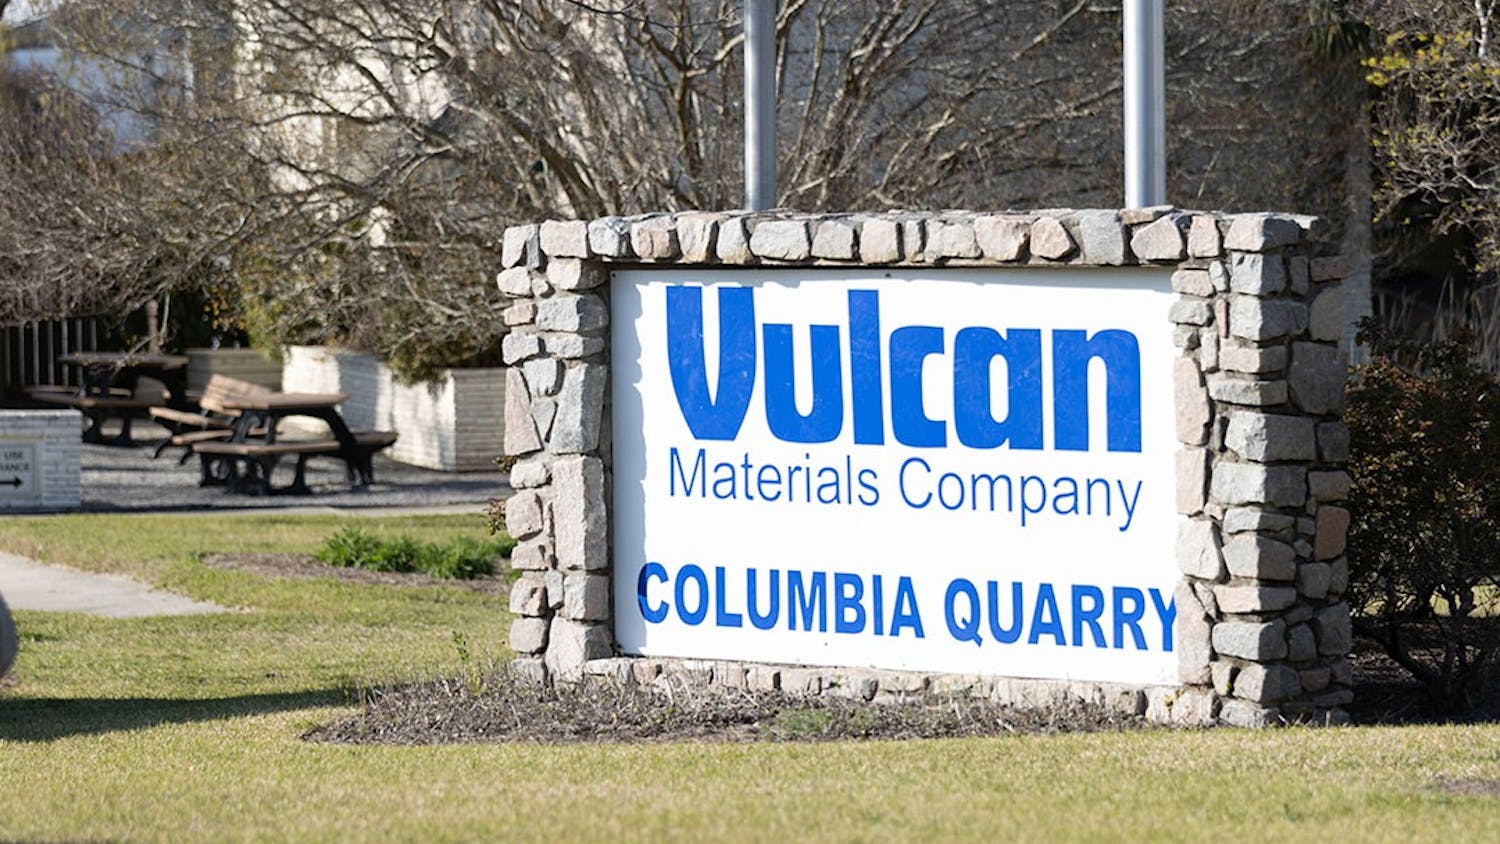 The Vulcan Materials Company Columbia Quarry entrance sign outside of the Columbia Quarry located on Georgia St. In the past two years, two USC students have been found dead in the quarry.